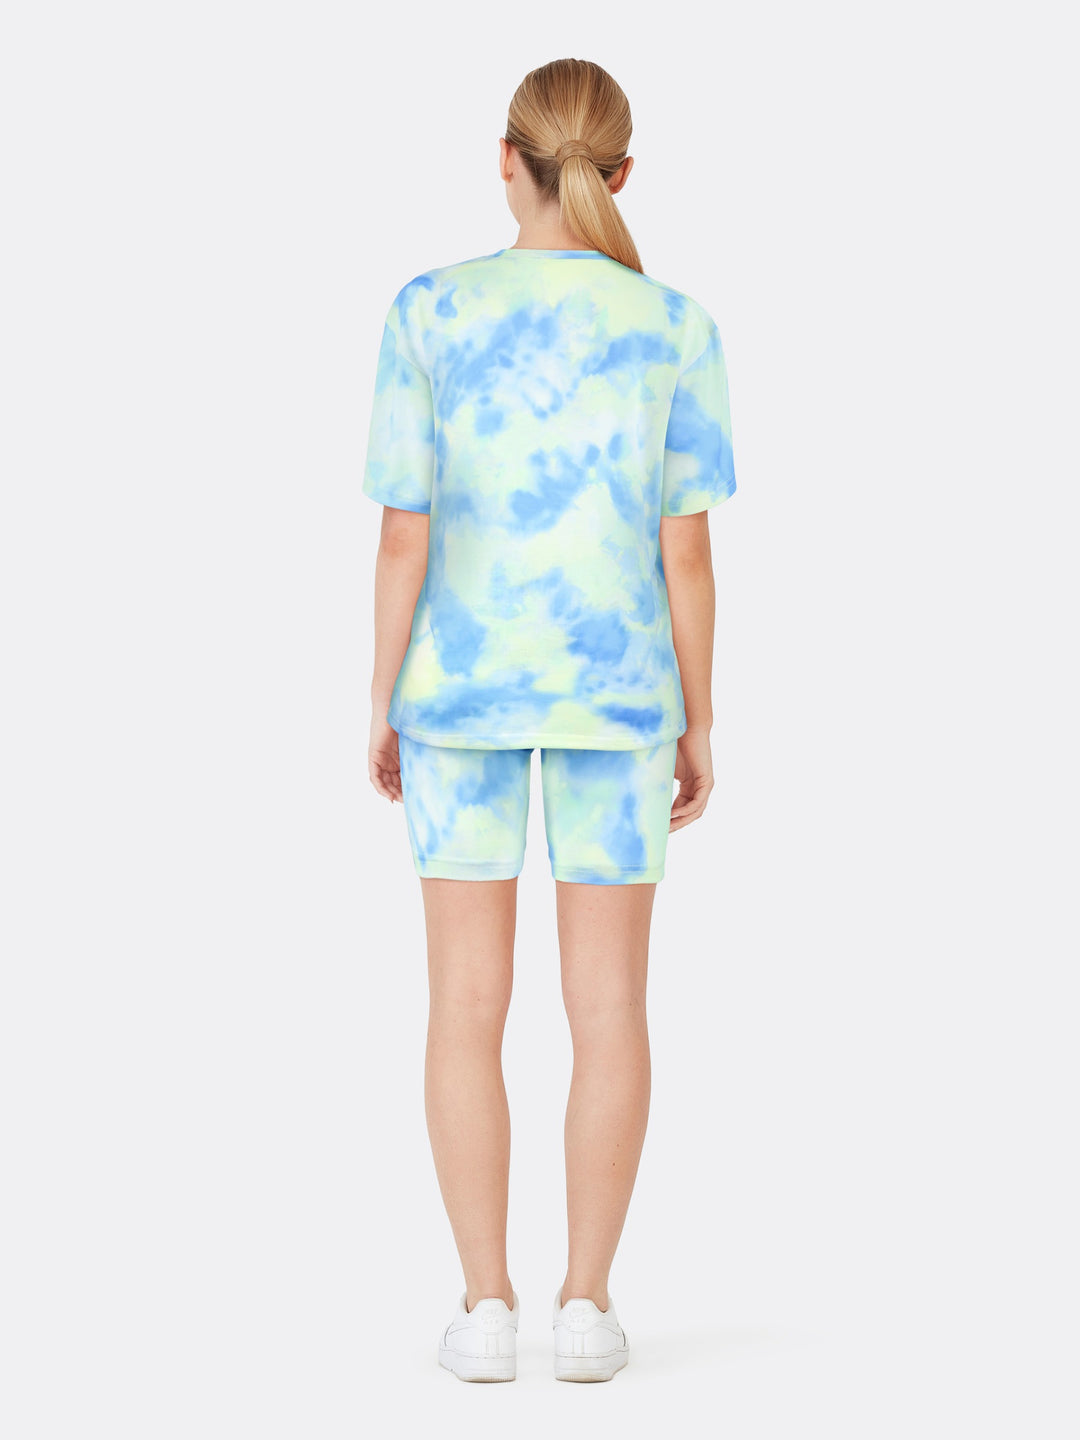 Tie Dye Loose Two-Piece Jogger Set Short Sleeve T-shirt and Shorts Blue Back | Jolovies